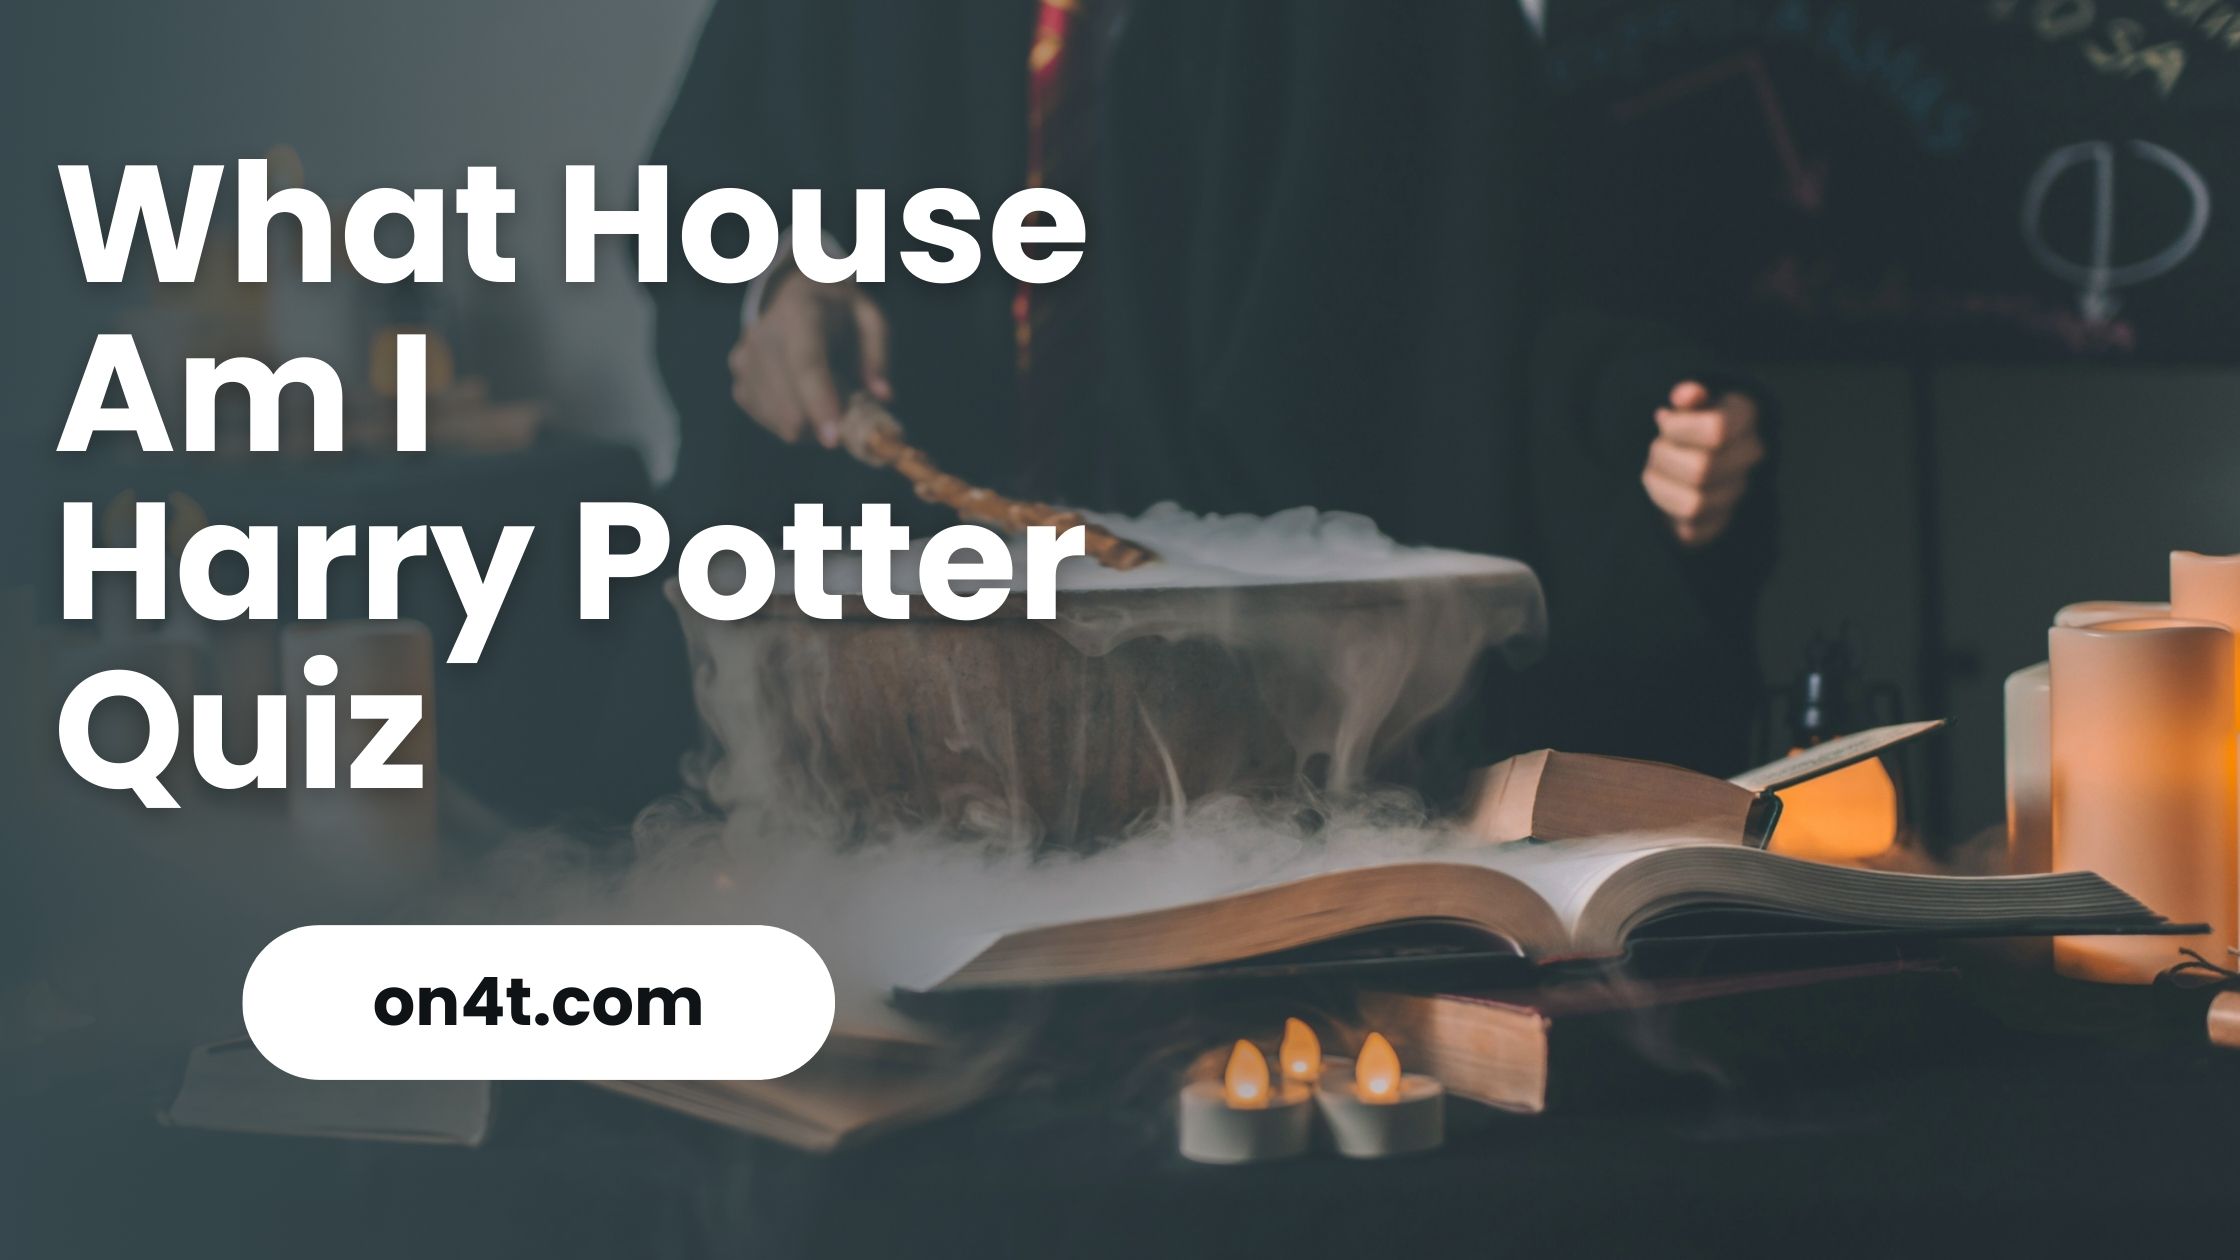 What House Am I Harry Potter Quiz